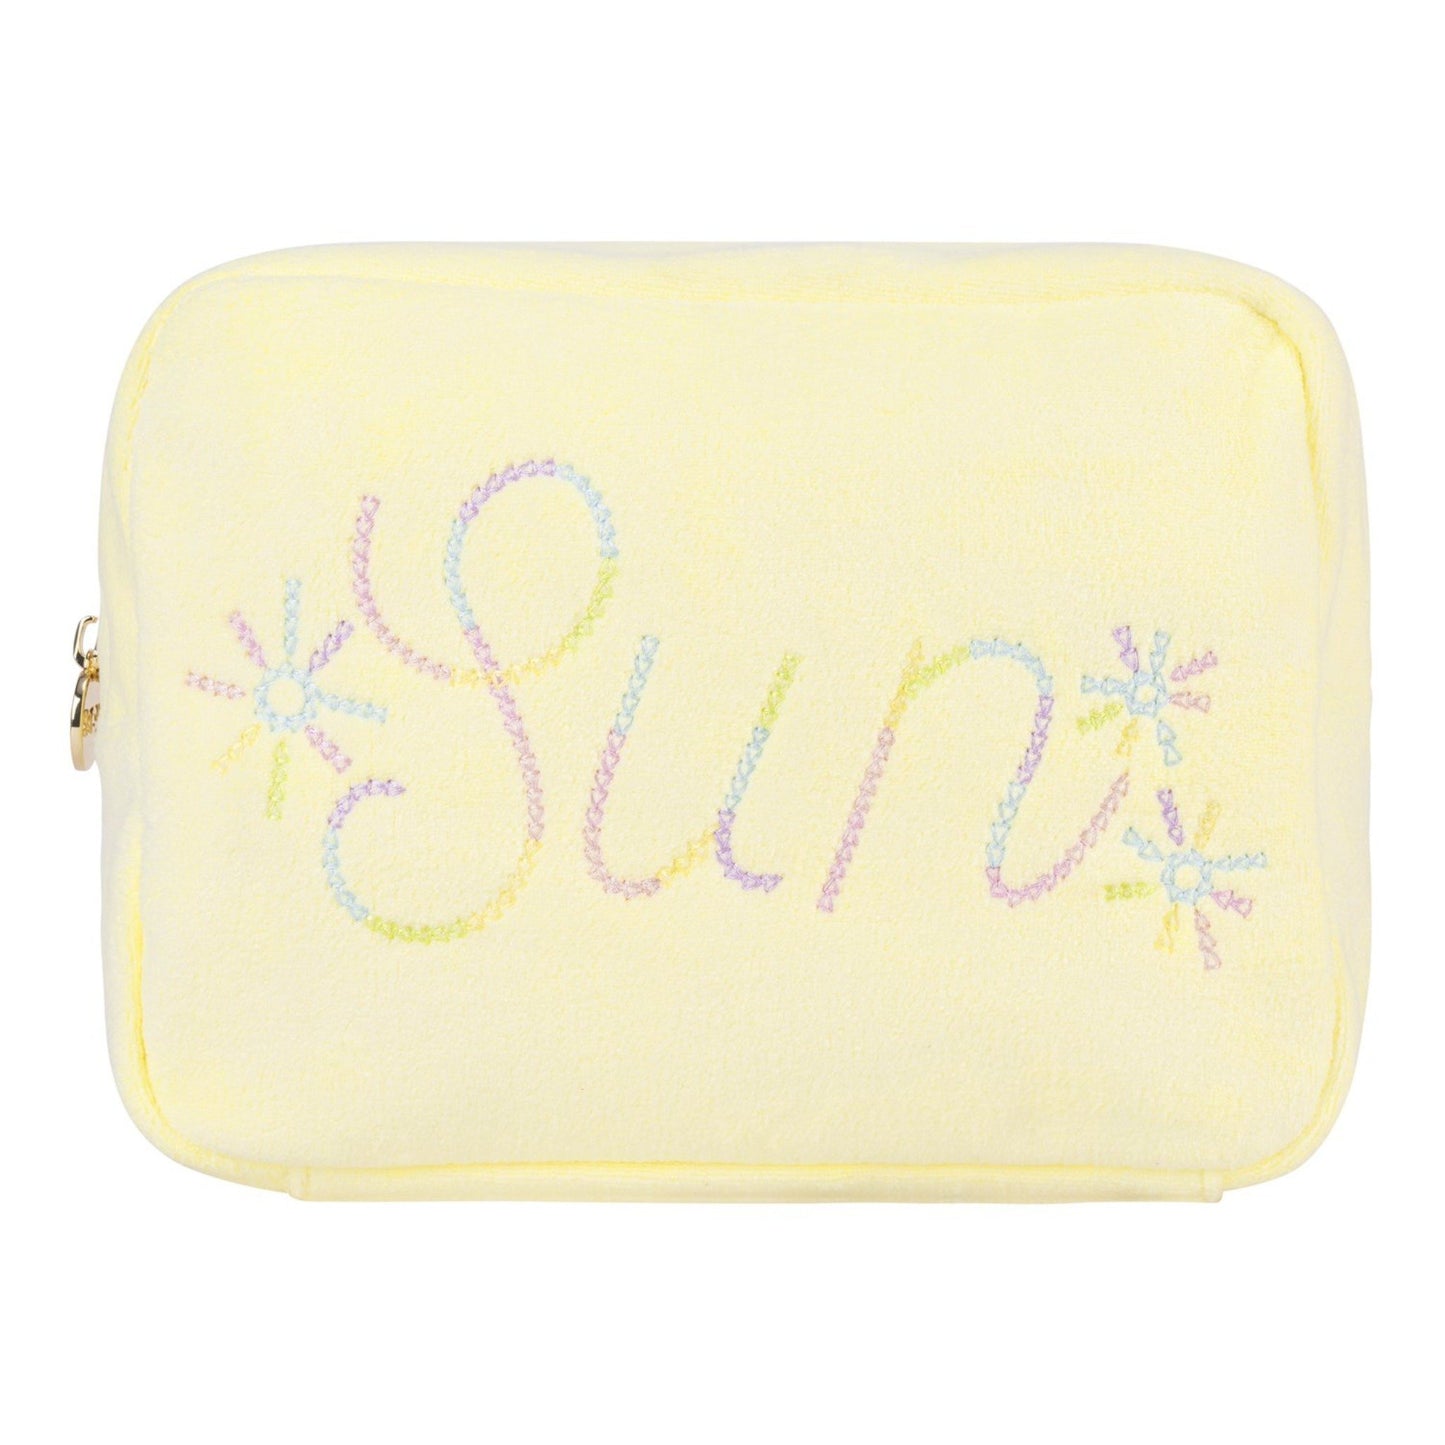 SCLN Embroidered "Sun" Large Pouch - a Spirit Animal - Pouch $120-$135 Color-Passion Fruit / Sun handbags-accessories